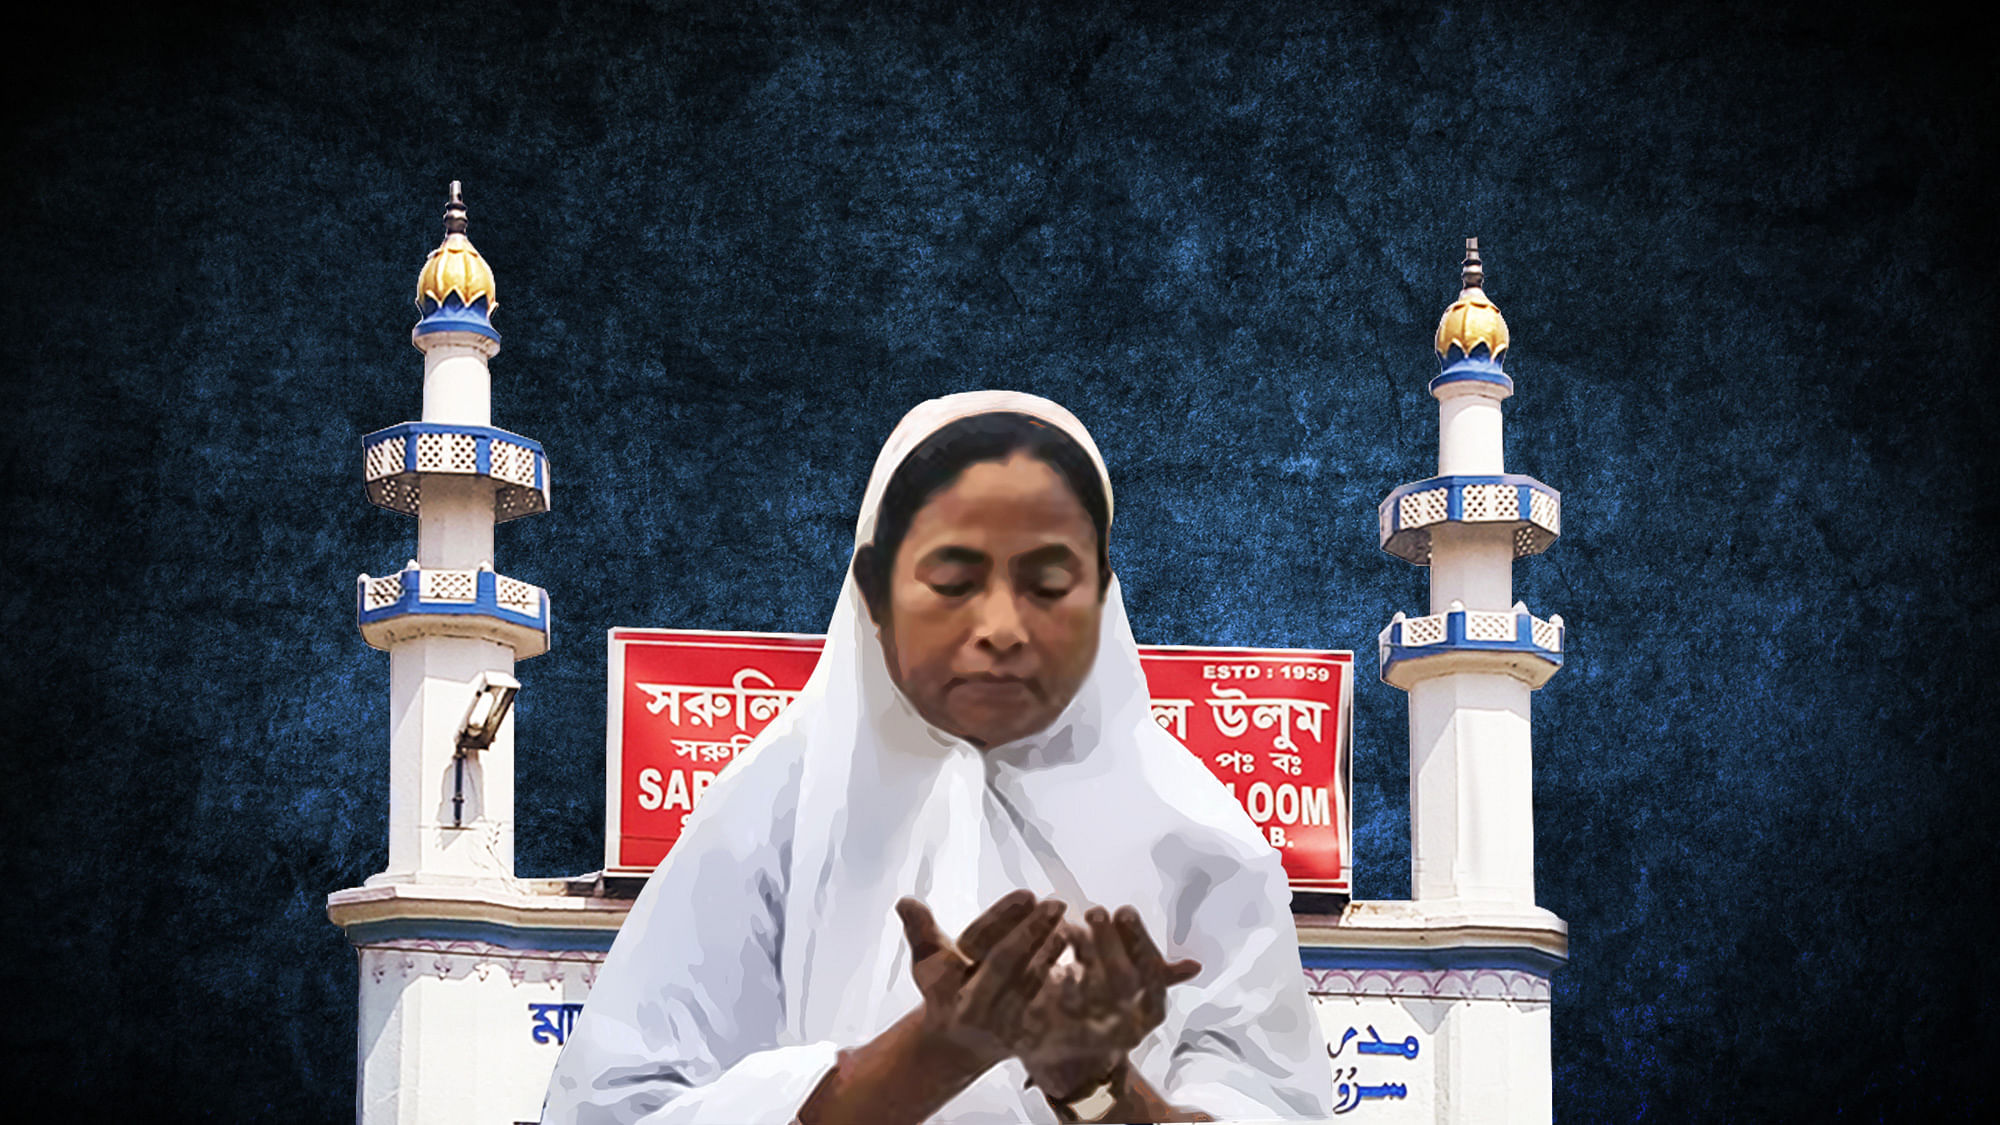 Muslims in Bengal continue to languish even as Mamata-led government doles out several schemes for the community. (Photo: The Quint)